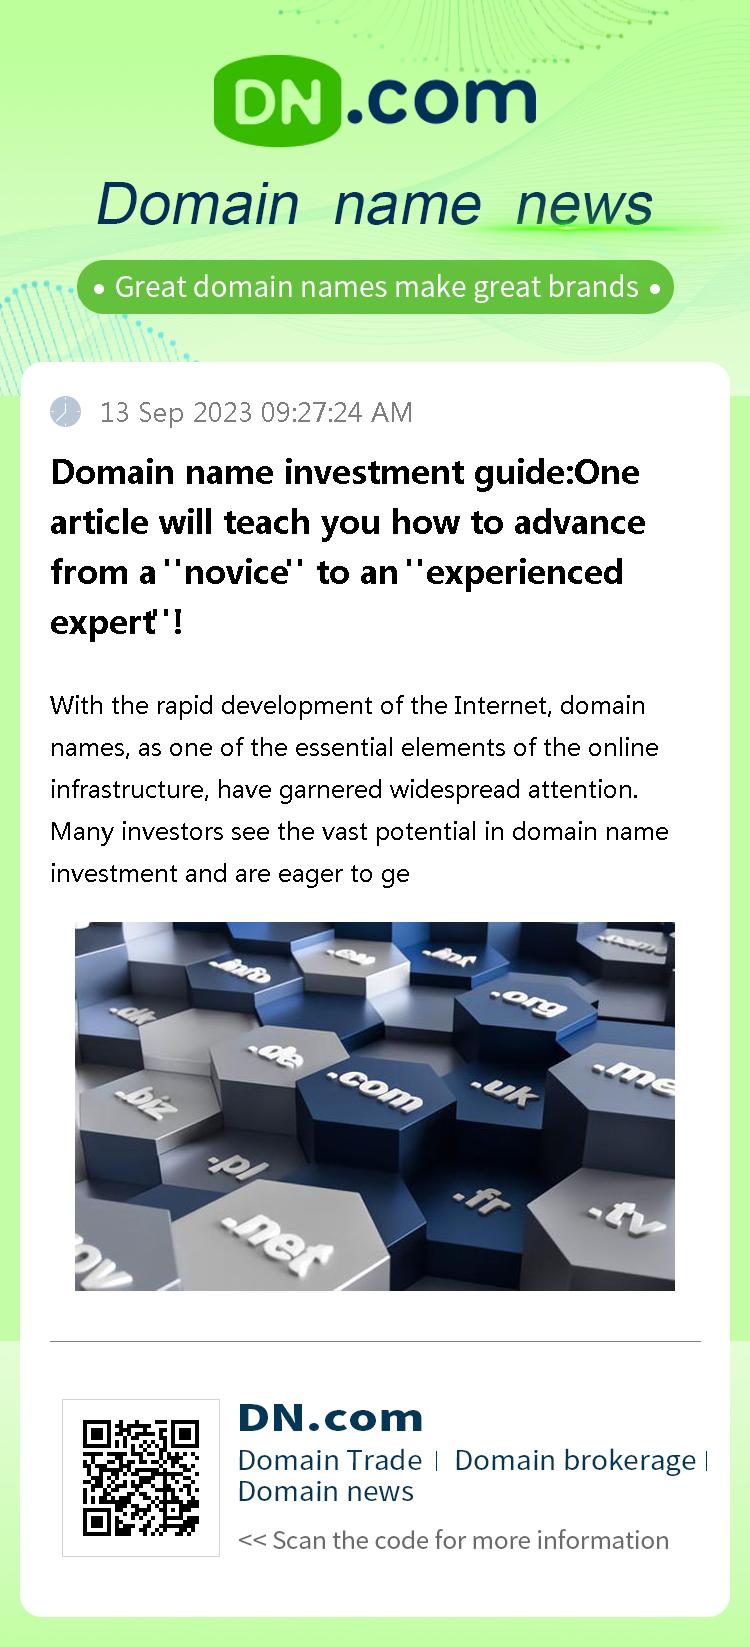 Domain name investment guide:One article will teach you how to advance from a 